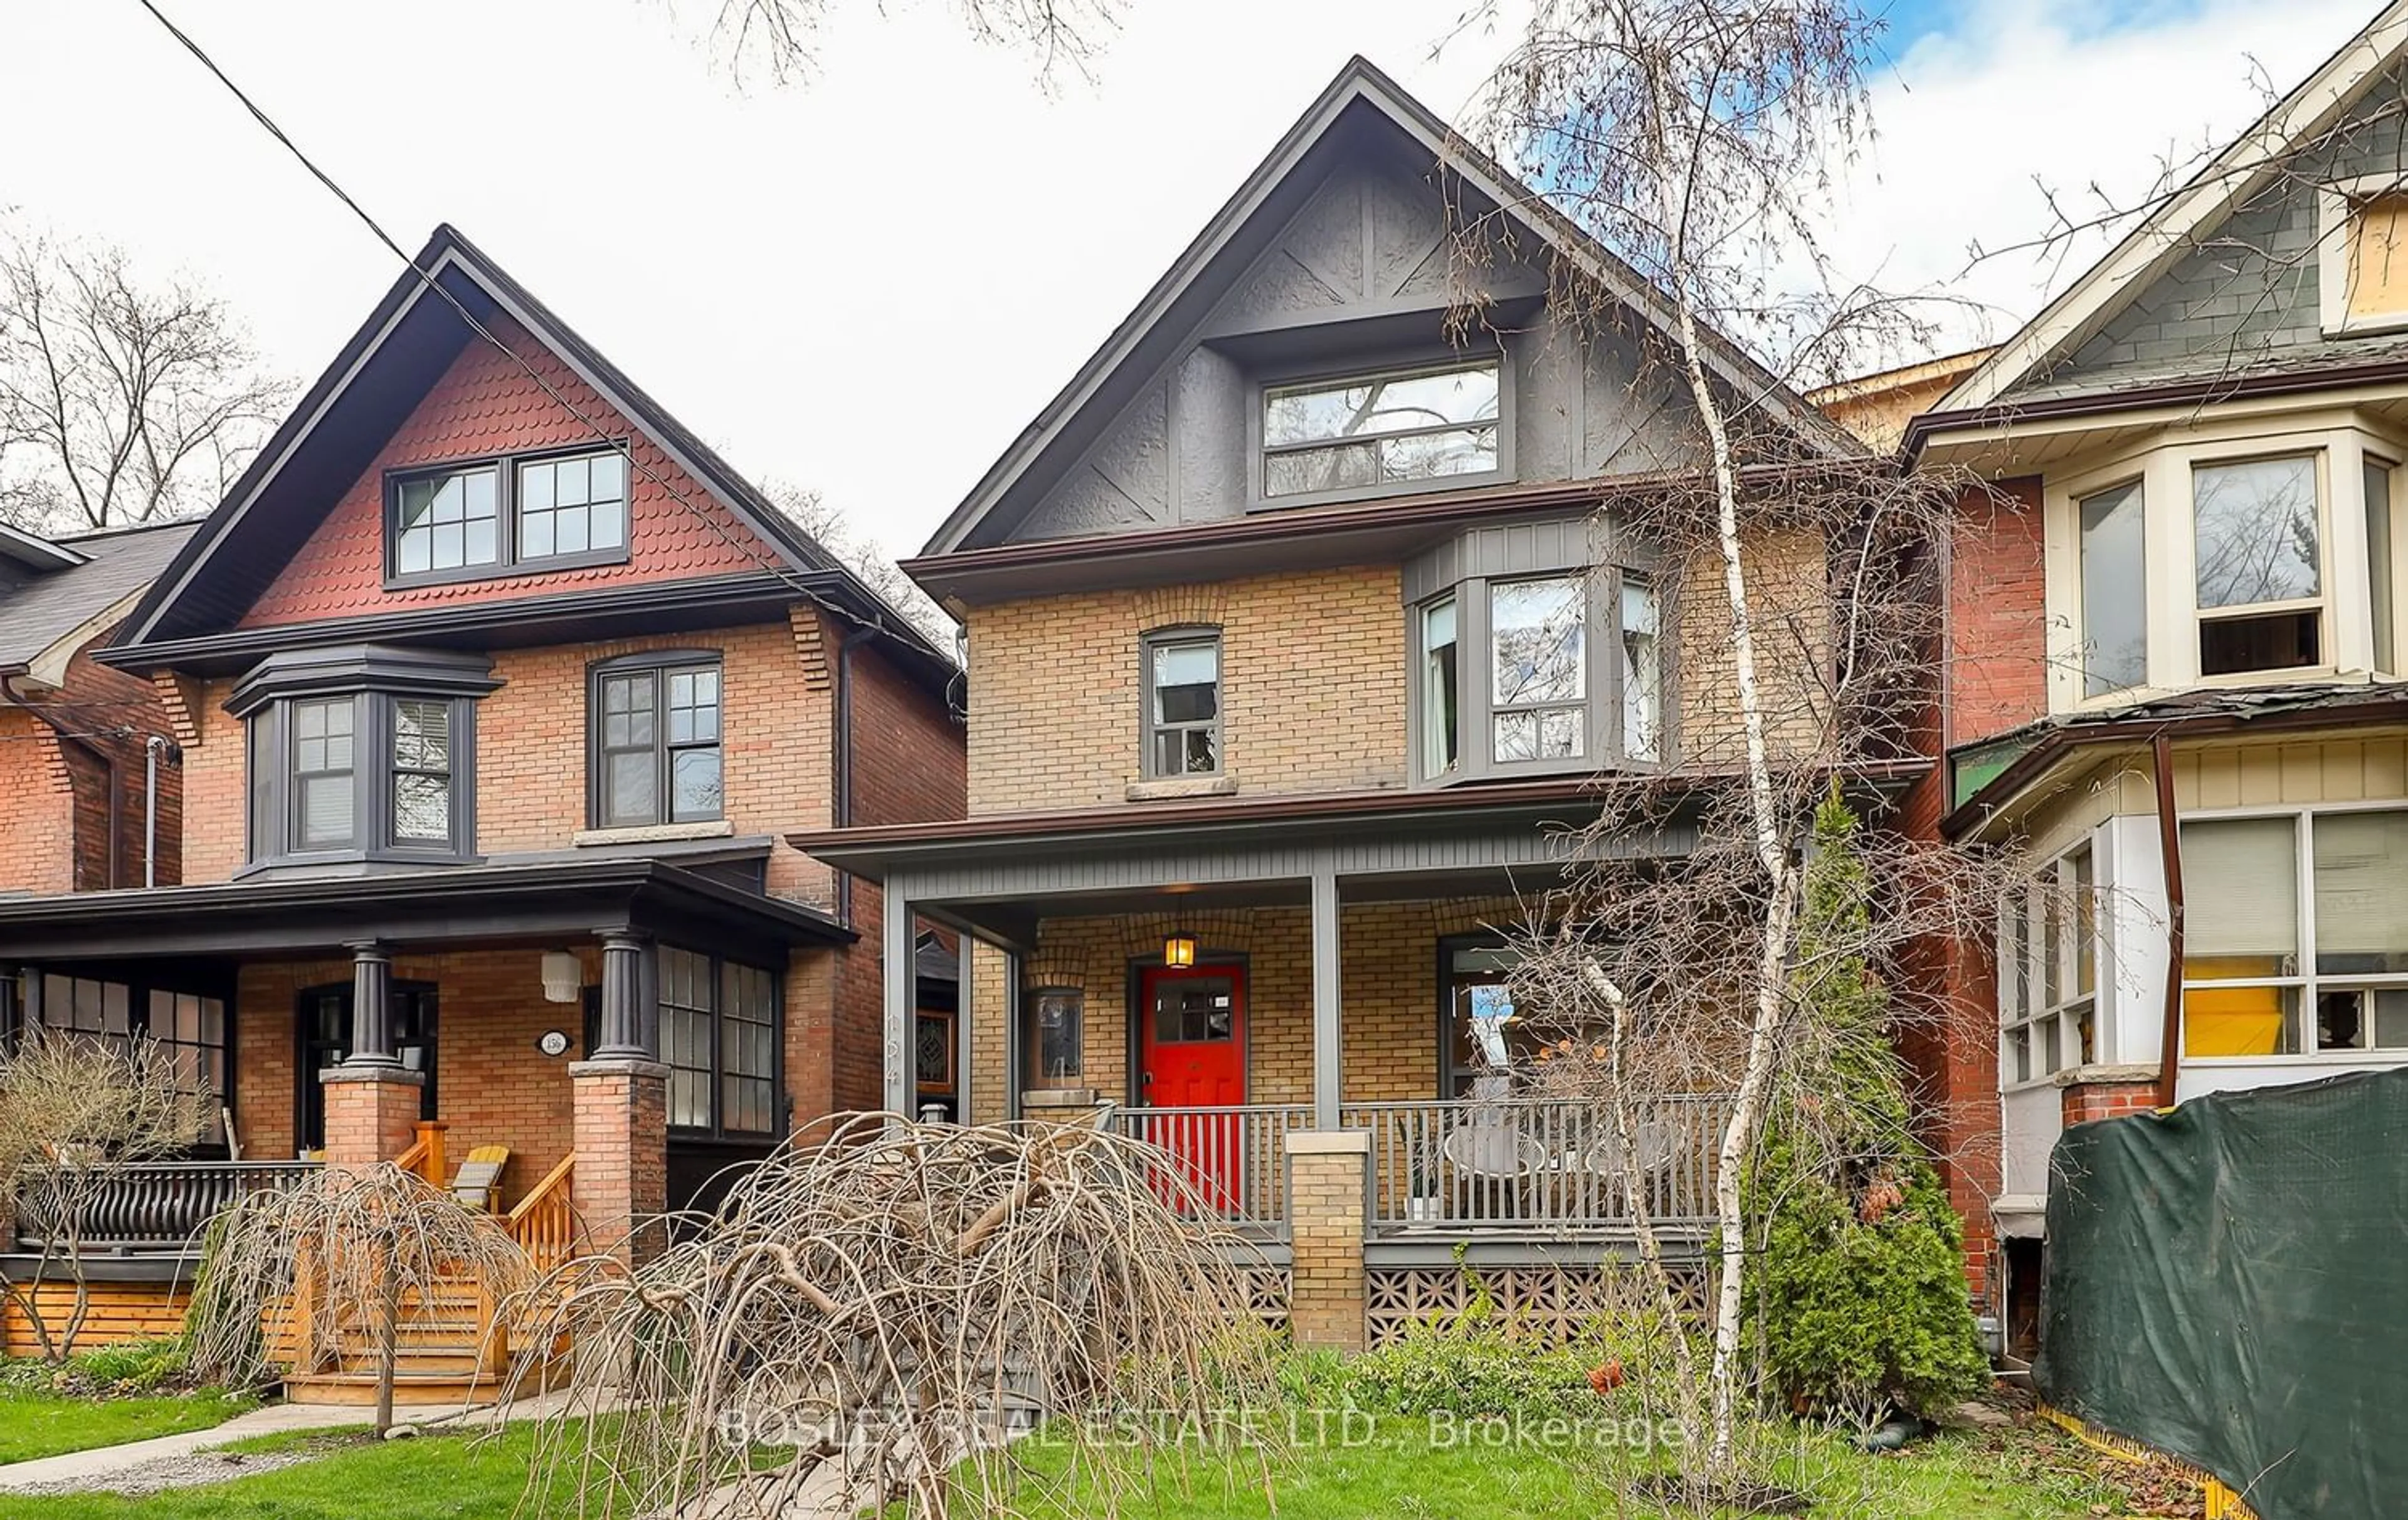 Home with brick exterior material for 154 Galley Ave, Toronto Ontario M6R 1H1